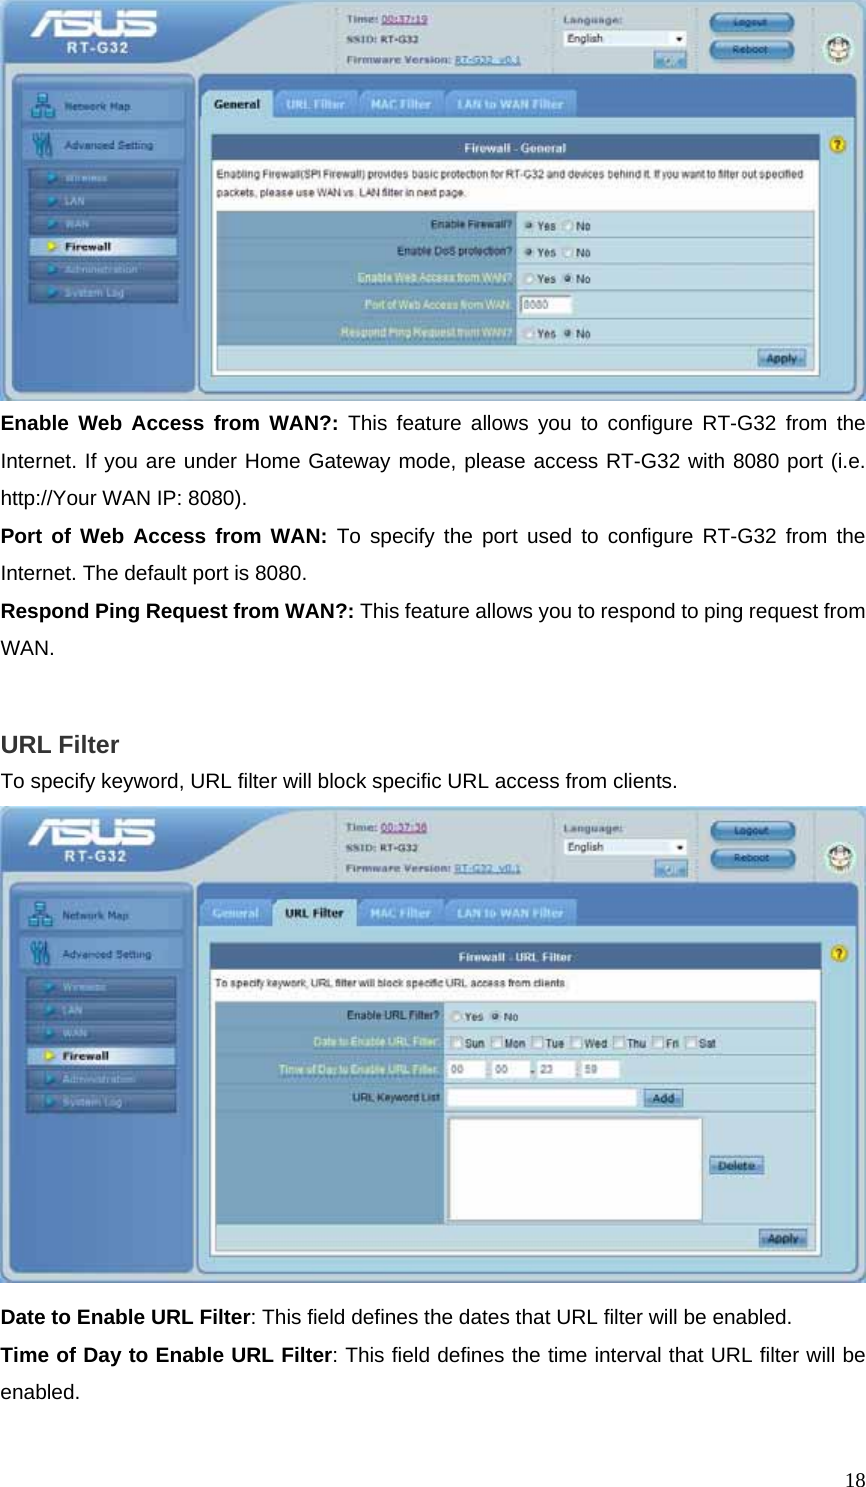  18 Enable Web Access from WAN?: This feature allows you to configure RT-G32 from the Internet. If you are under Home Gateway mode, please access RT-G32 with 8080 port (i.e. http://Your WAN IP: 8080). Port of Web Access from WAN: To specify the port used to configure RT-G32 from the Internet. The default port is 8080. Respond Ping Request from WAN?: This feature allows you to respond to ping request from WAN.  URL Filter   To specify keyword, URL filter will block specific URL access from clients.  Date to Enable URL Filter: This field defines the dates that URL filter will be enabled. Time of Day to Enable URL Filter: This field defines the time interval that URL filter will be enabled. 